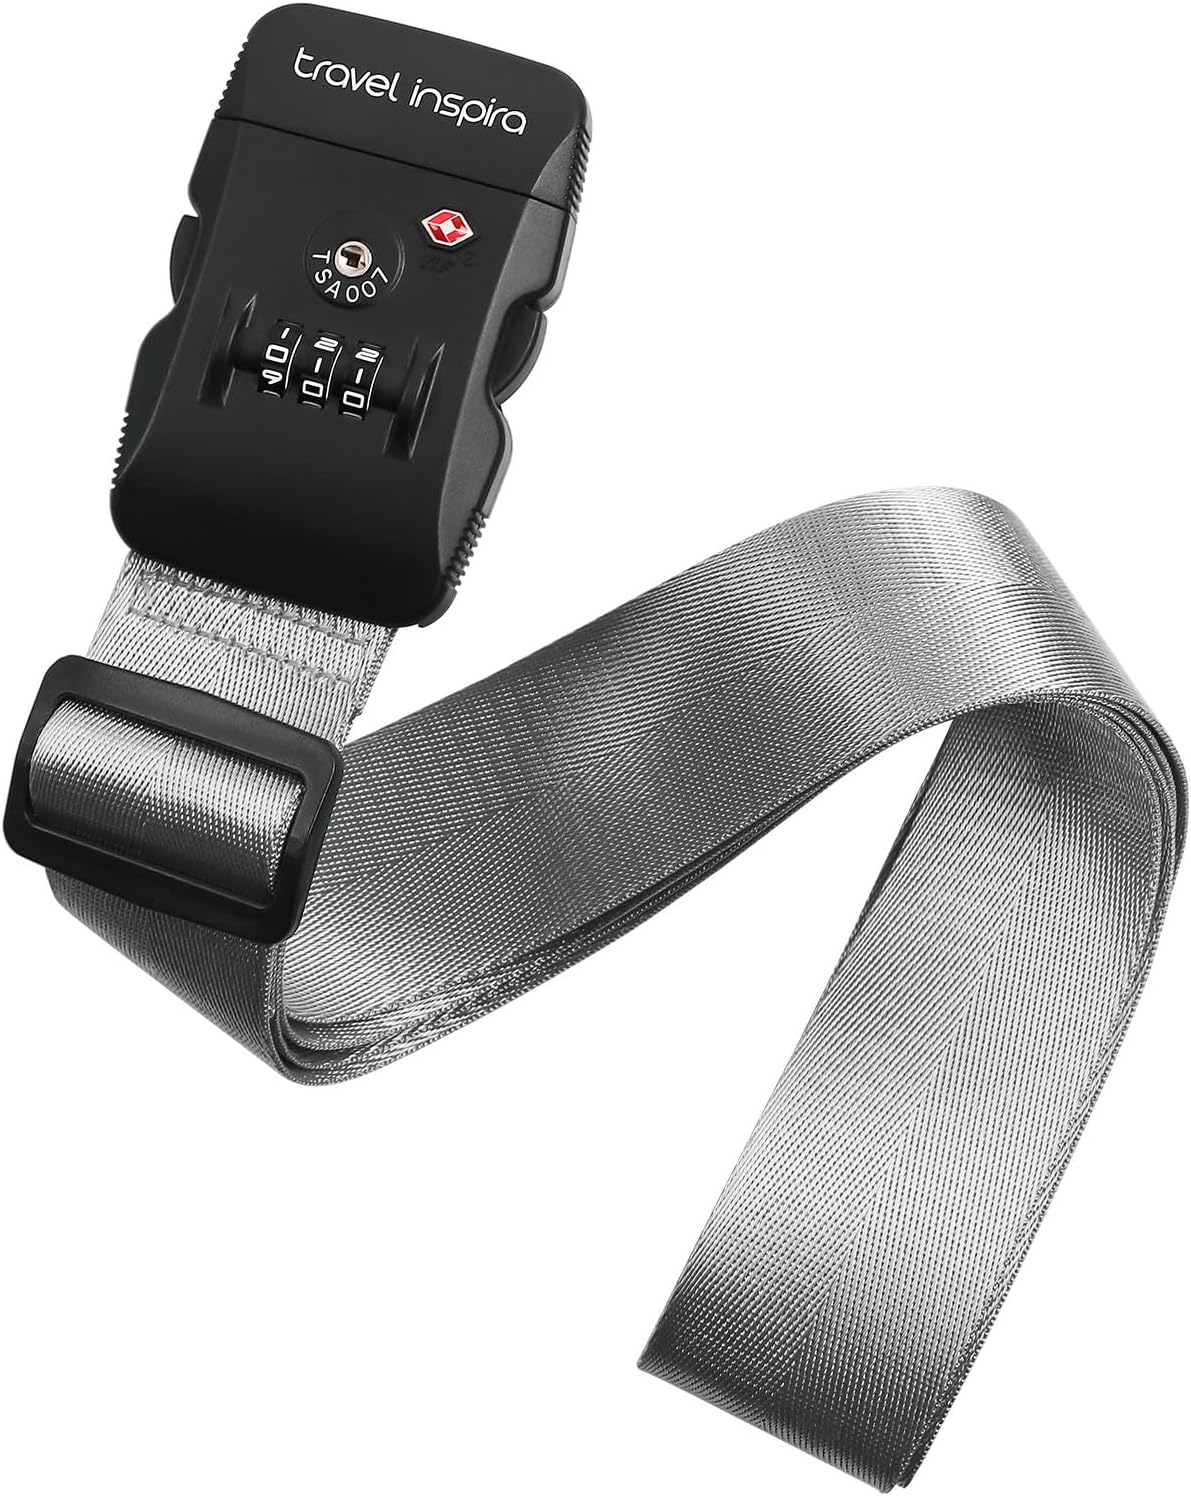 Travel Inspira Luggage Straps with TSA Combination Lock - Adjustable, Easy to Use, Protect Your Luggage, Grey